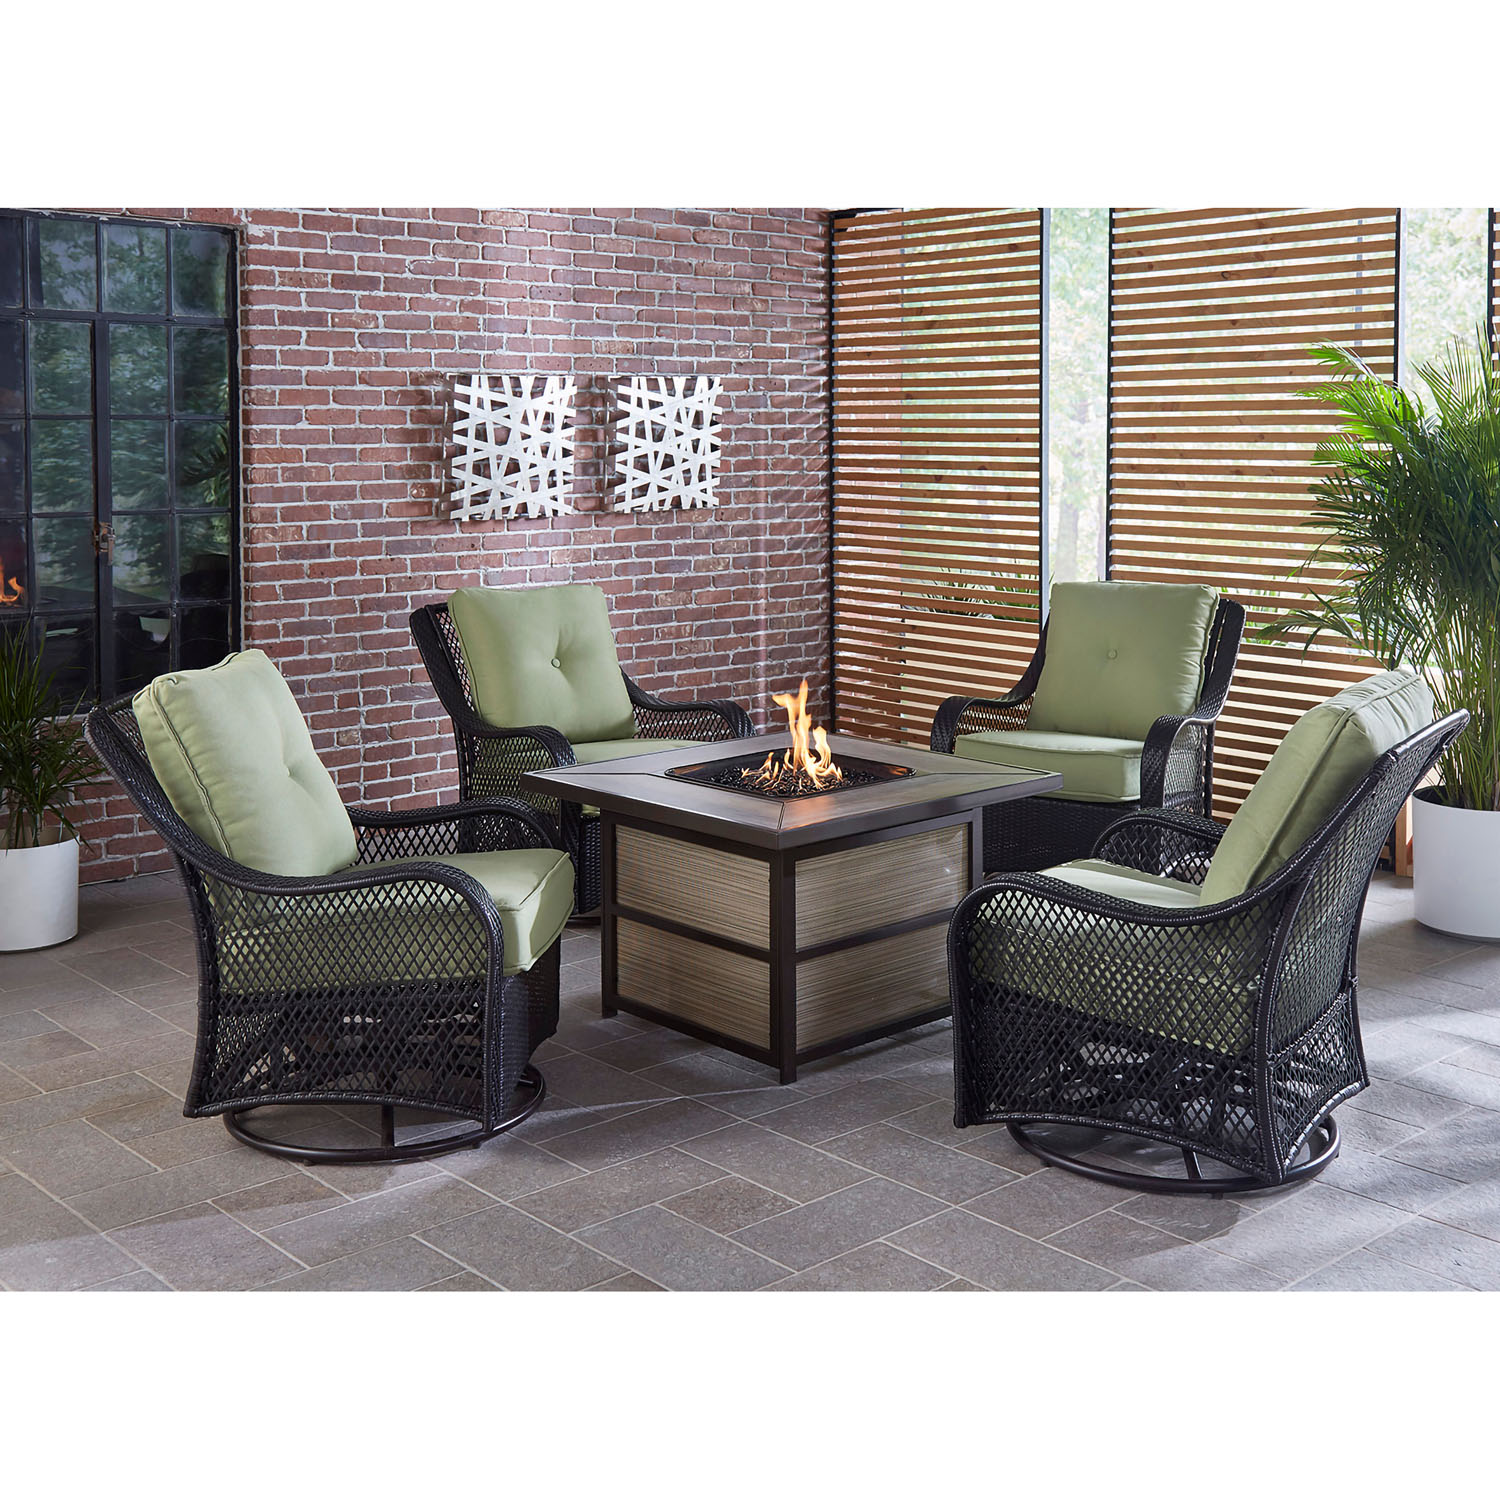 Hanover Orleans 5 Pcs Wicker and Steel Propane Fire Pit Chat Set, Avocado Green - image 3 of 9